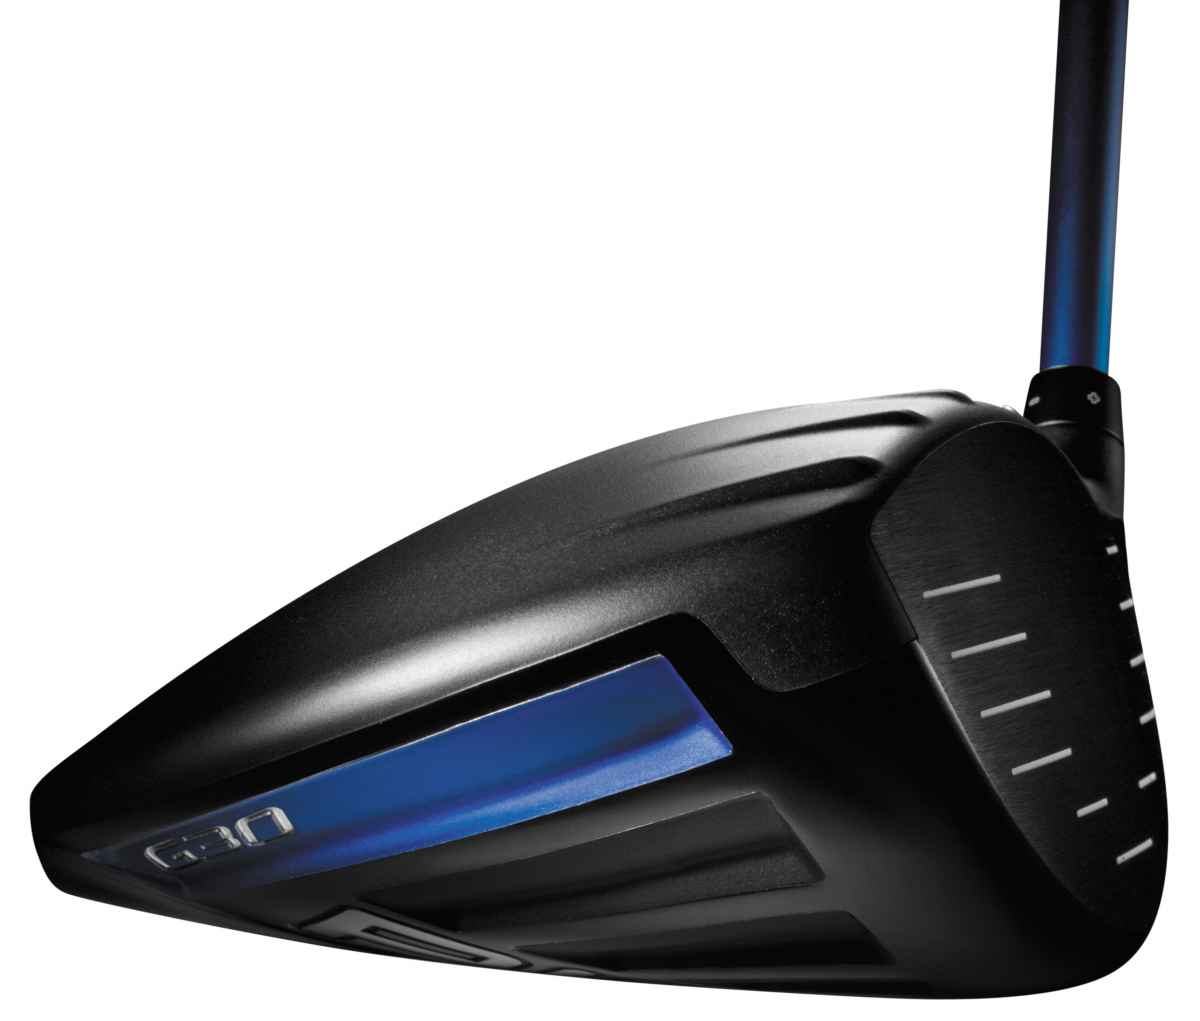 PING G30 tops driver sales for September